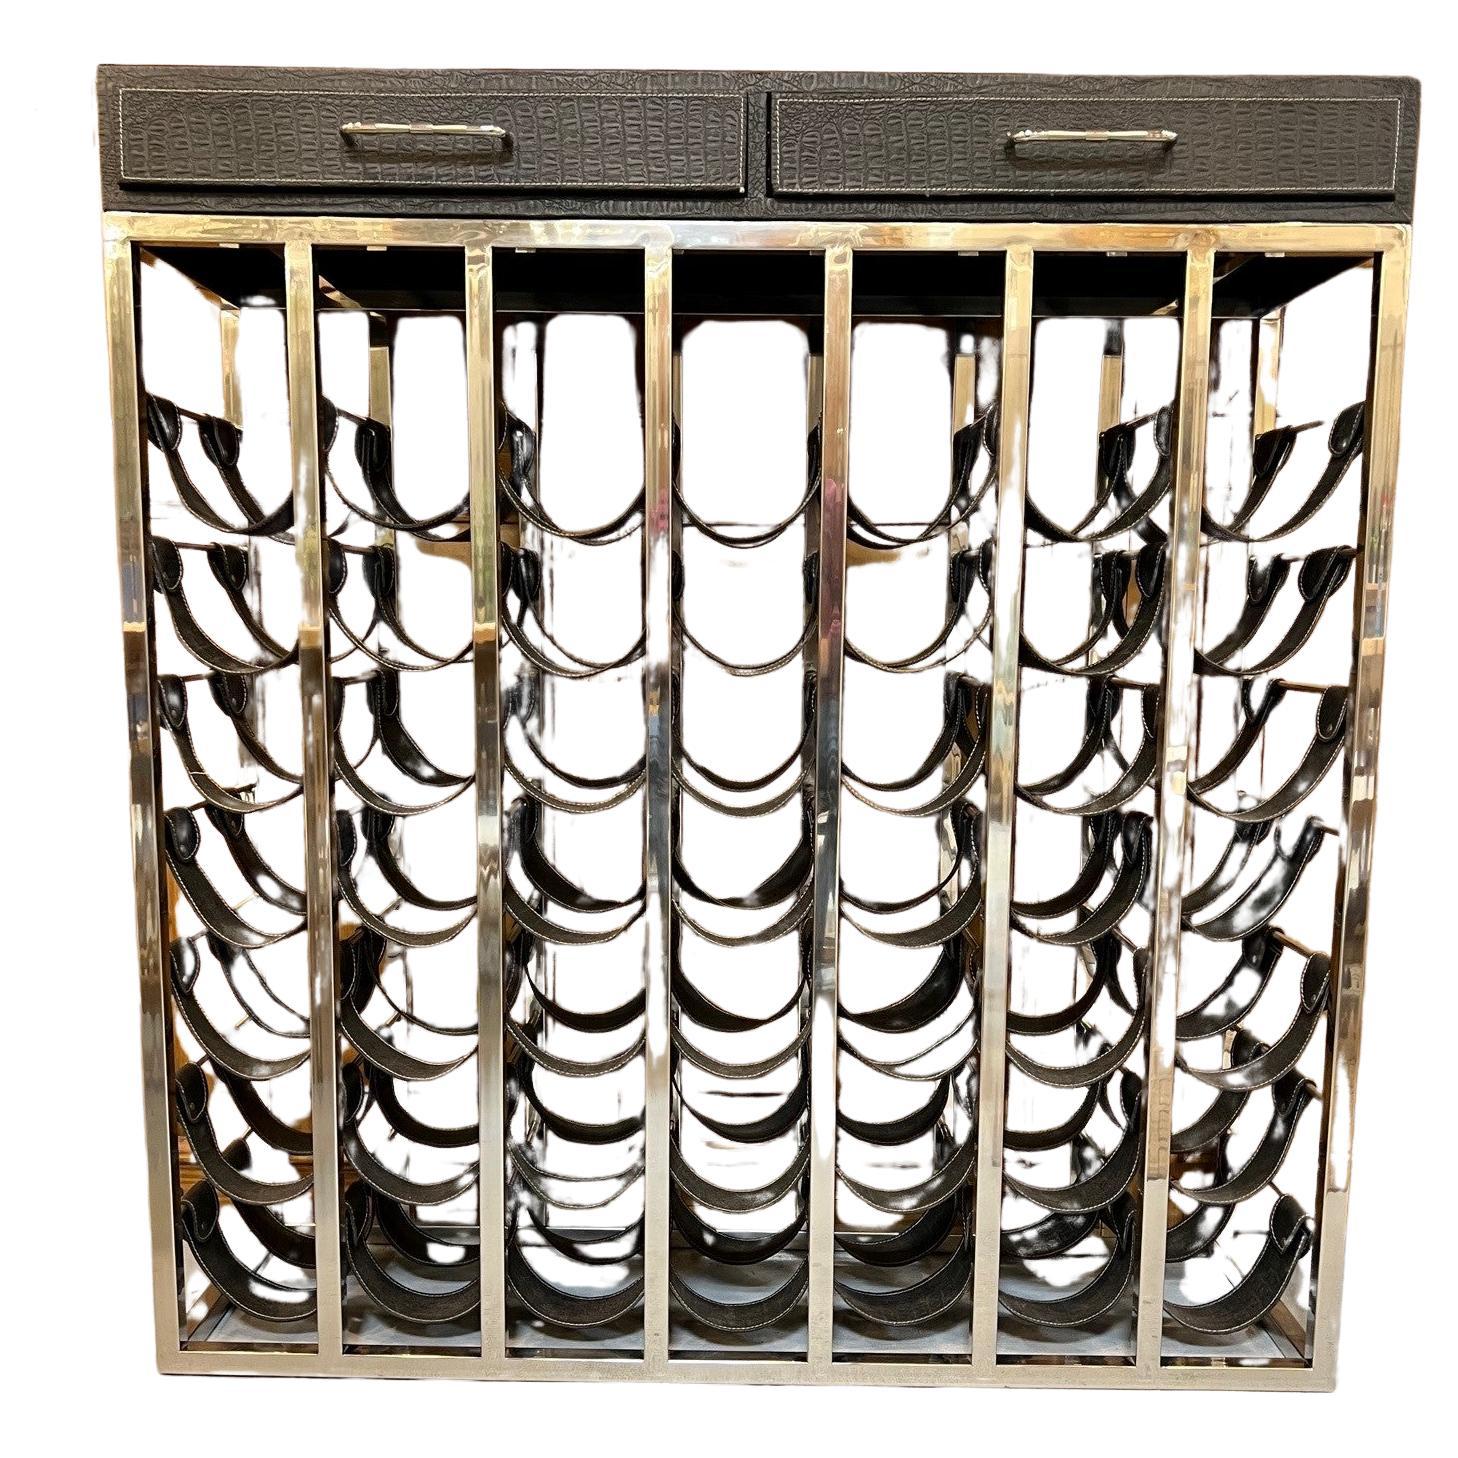 Nickel Wine Rack Console with Leather Saddles for 49 Bottles and Two Drawers